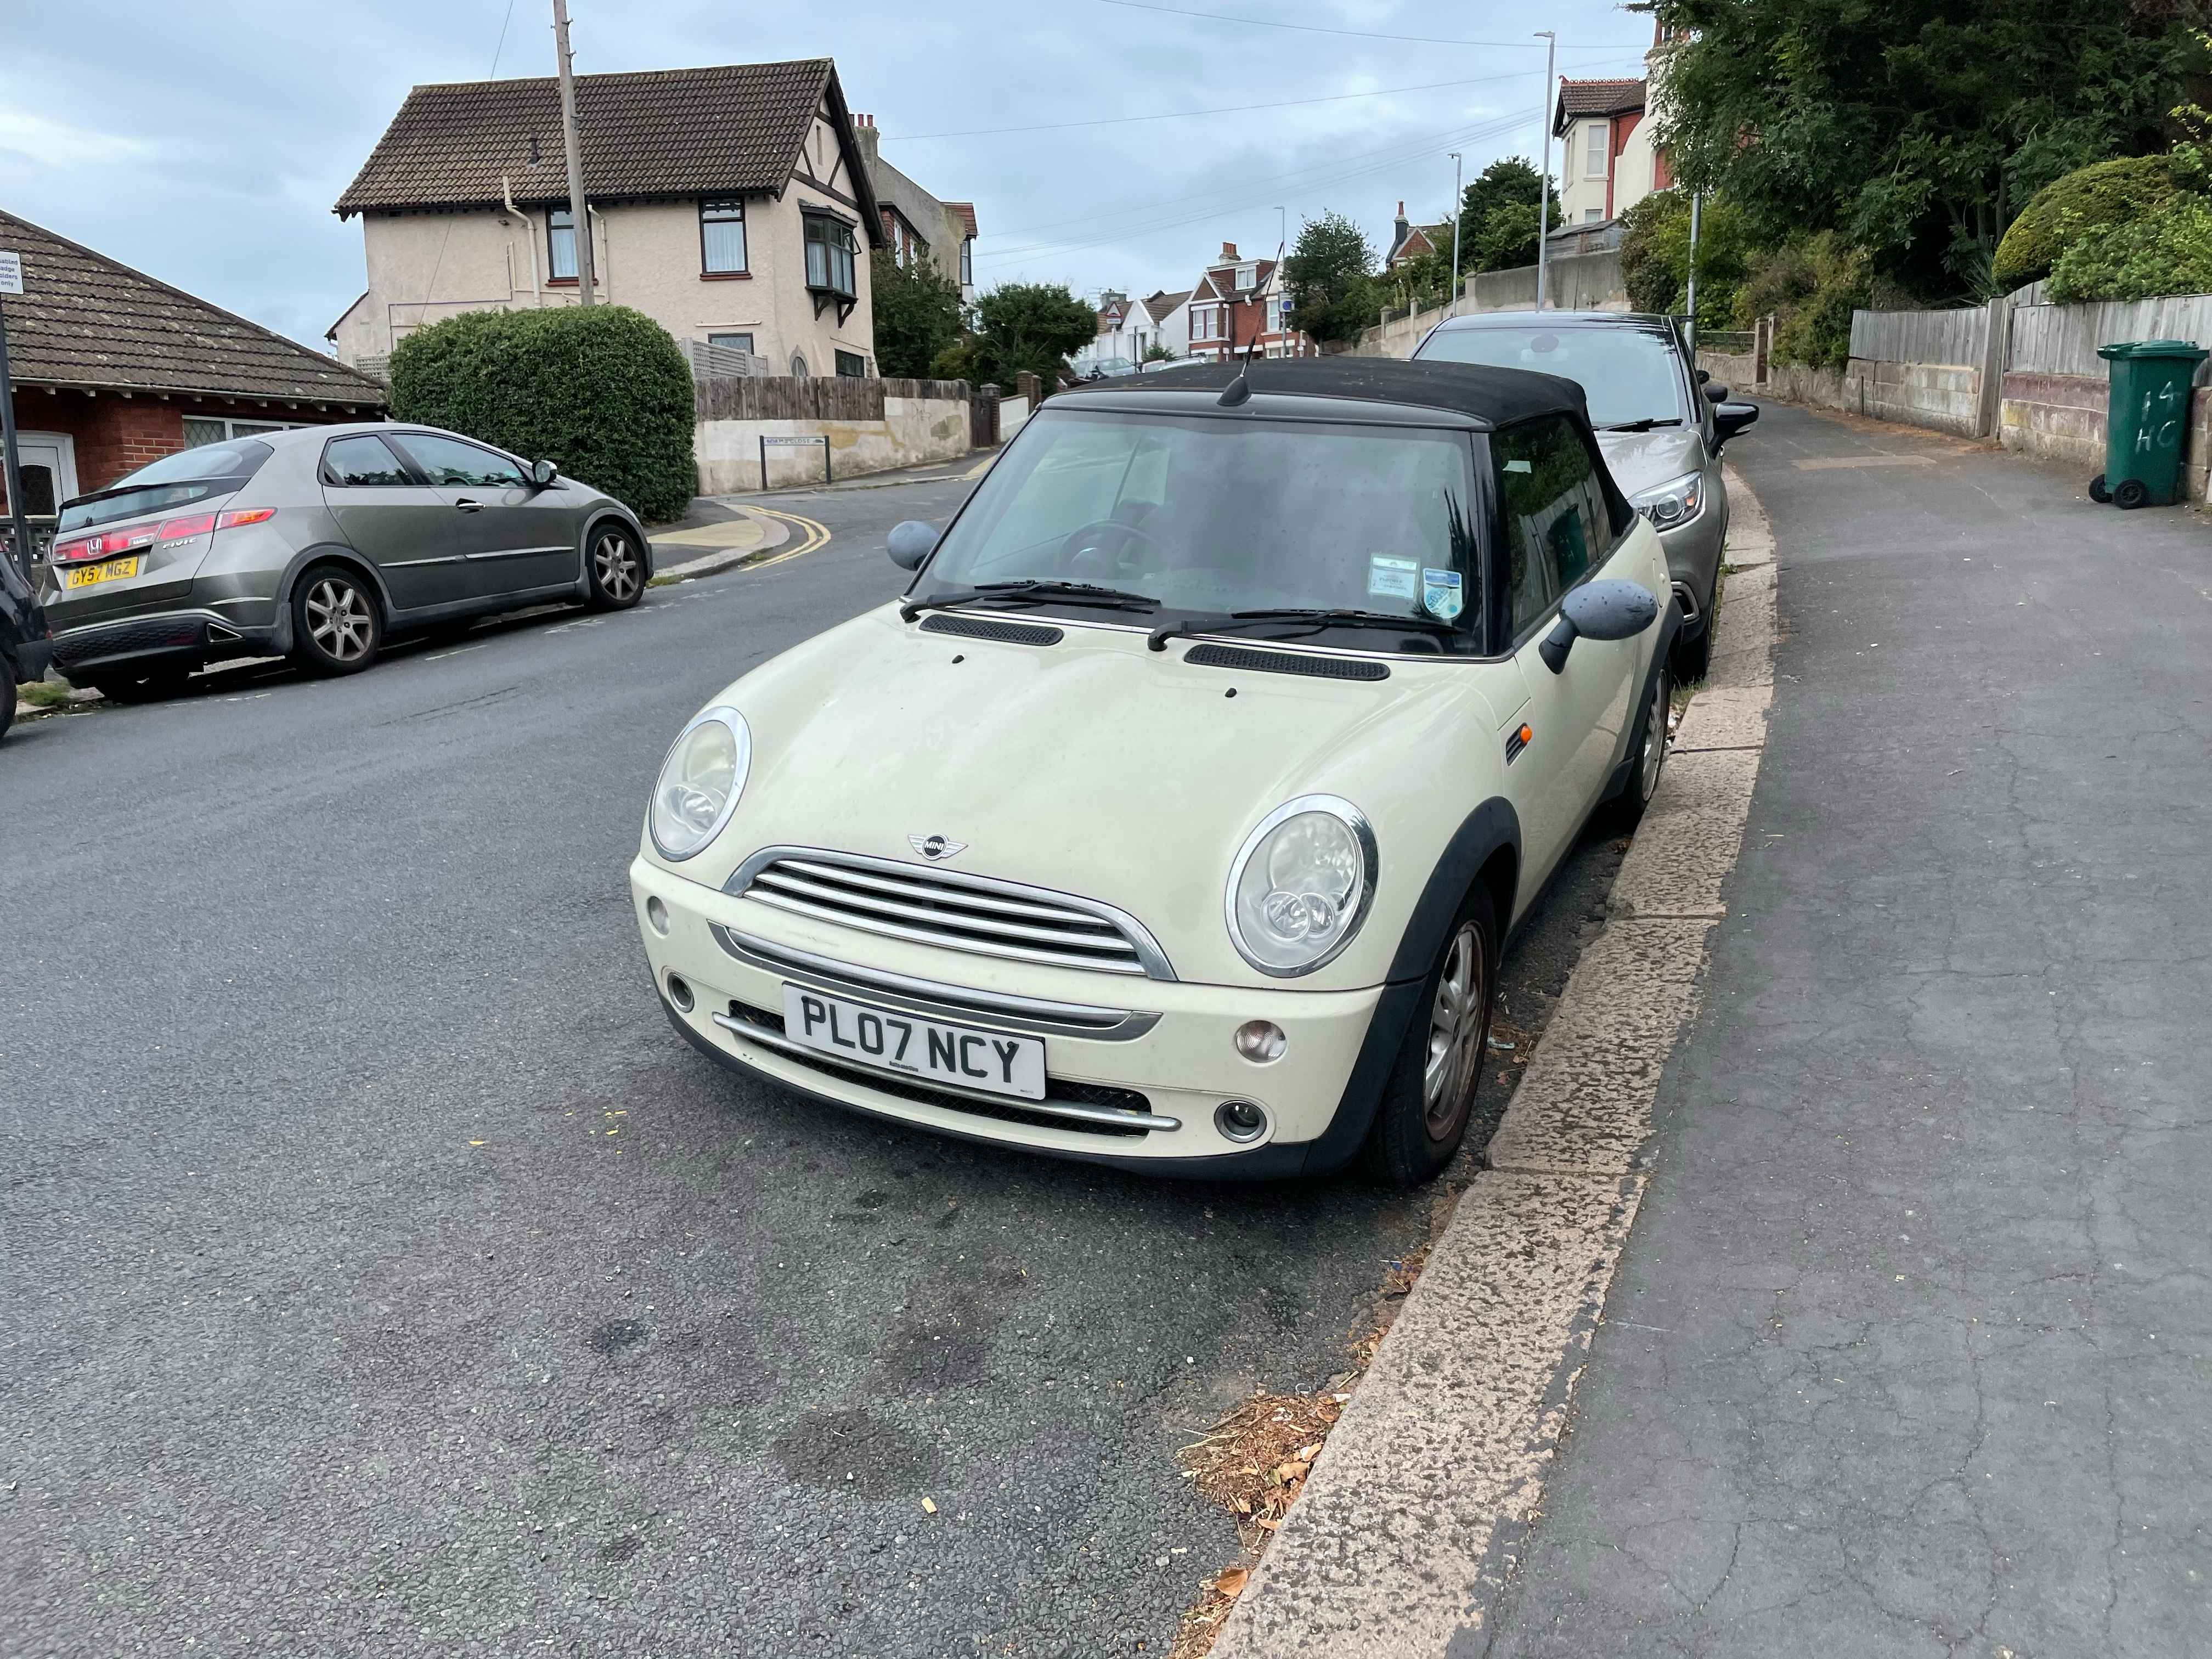 Photograph of PL07 NCY - a White Mini One parked in Hollingdean by a non-resident, and potentially abandoned. The second of two photographs supplied by the residents of Hollingdean.